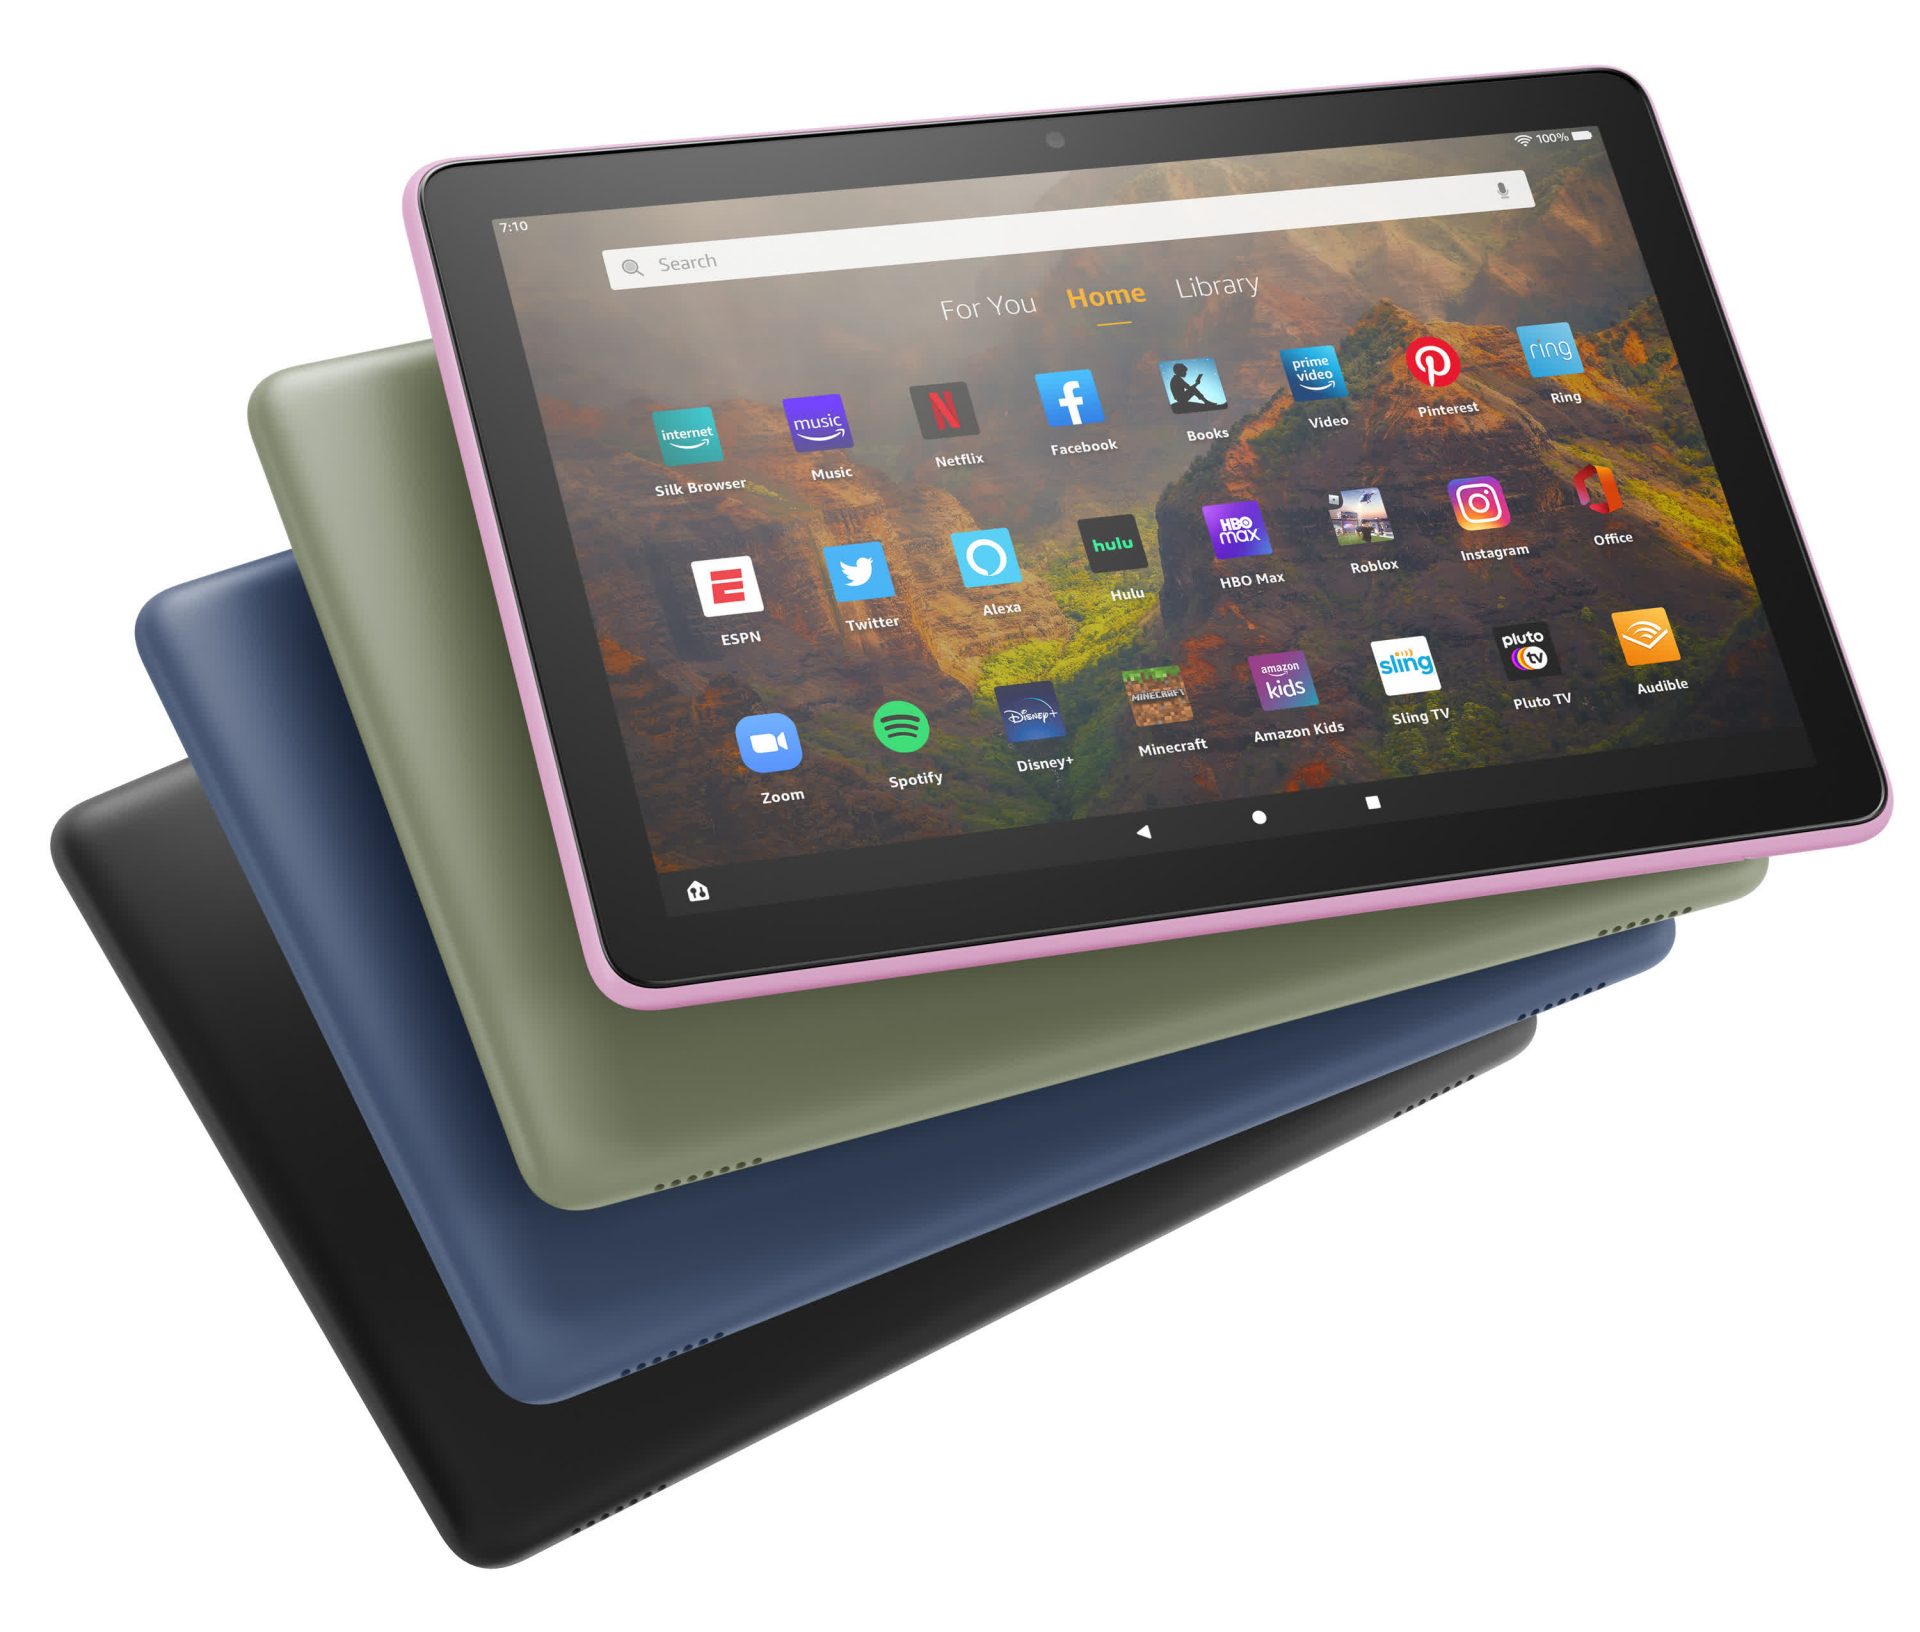 Amazon tablet lineup change brings recent Fire HD 10, Fire Kids Pro, and Fire Kids 10 items